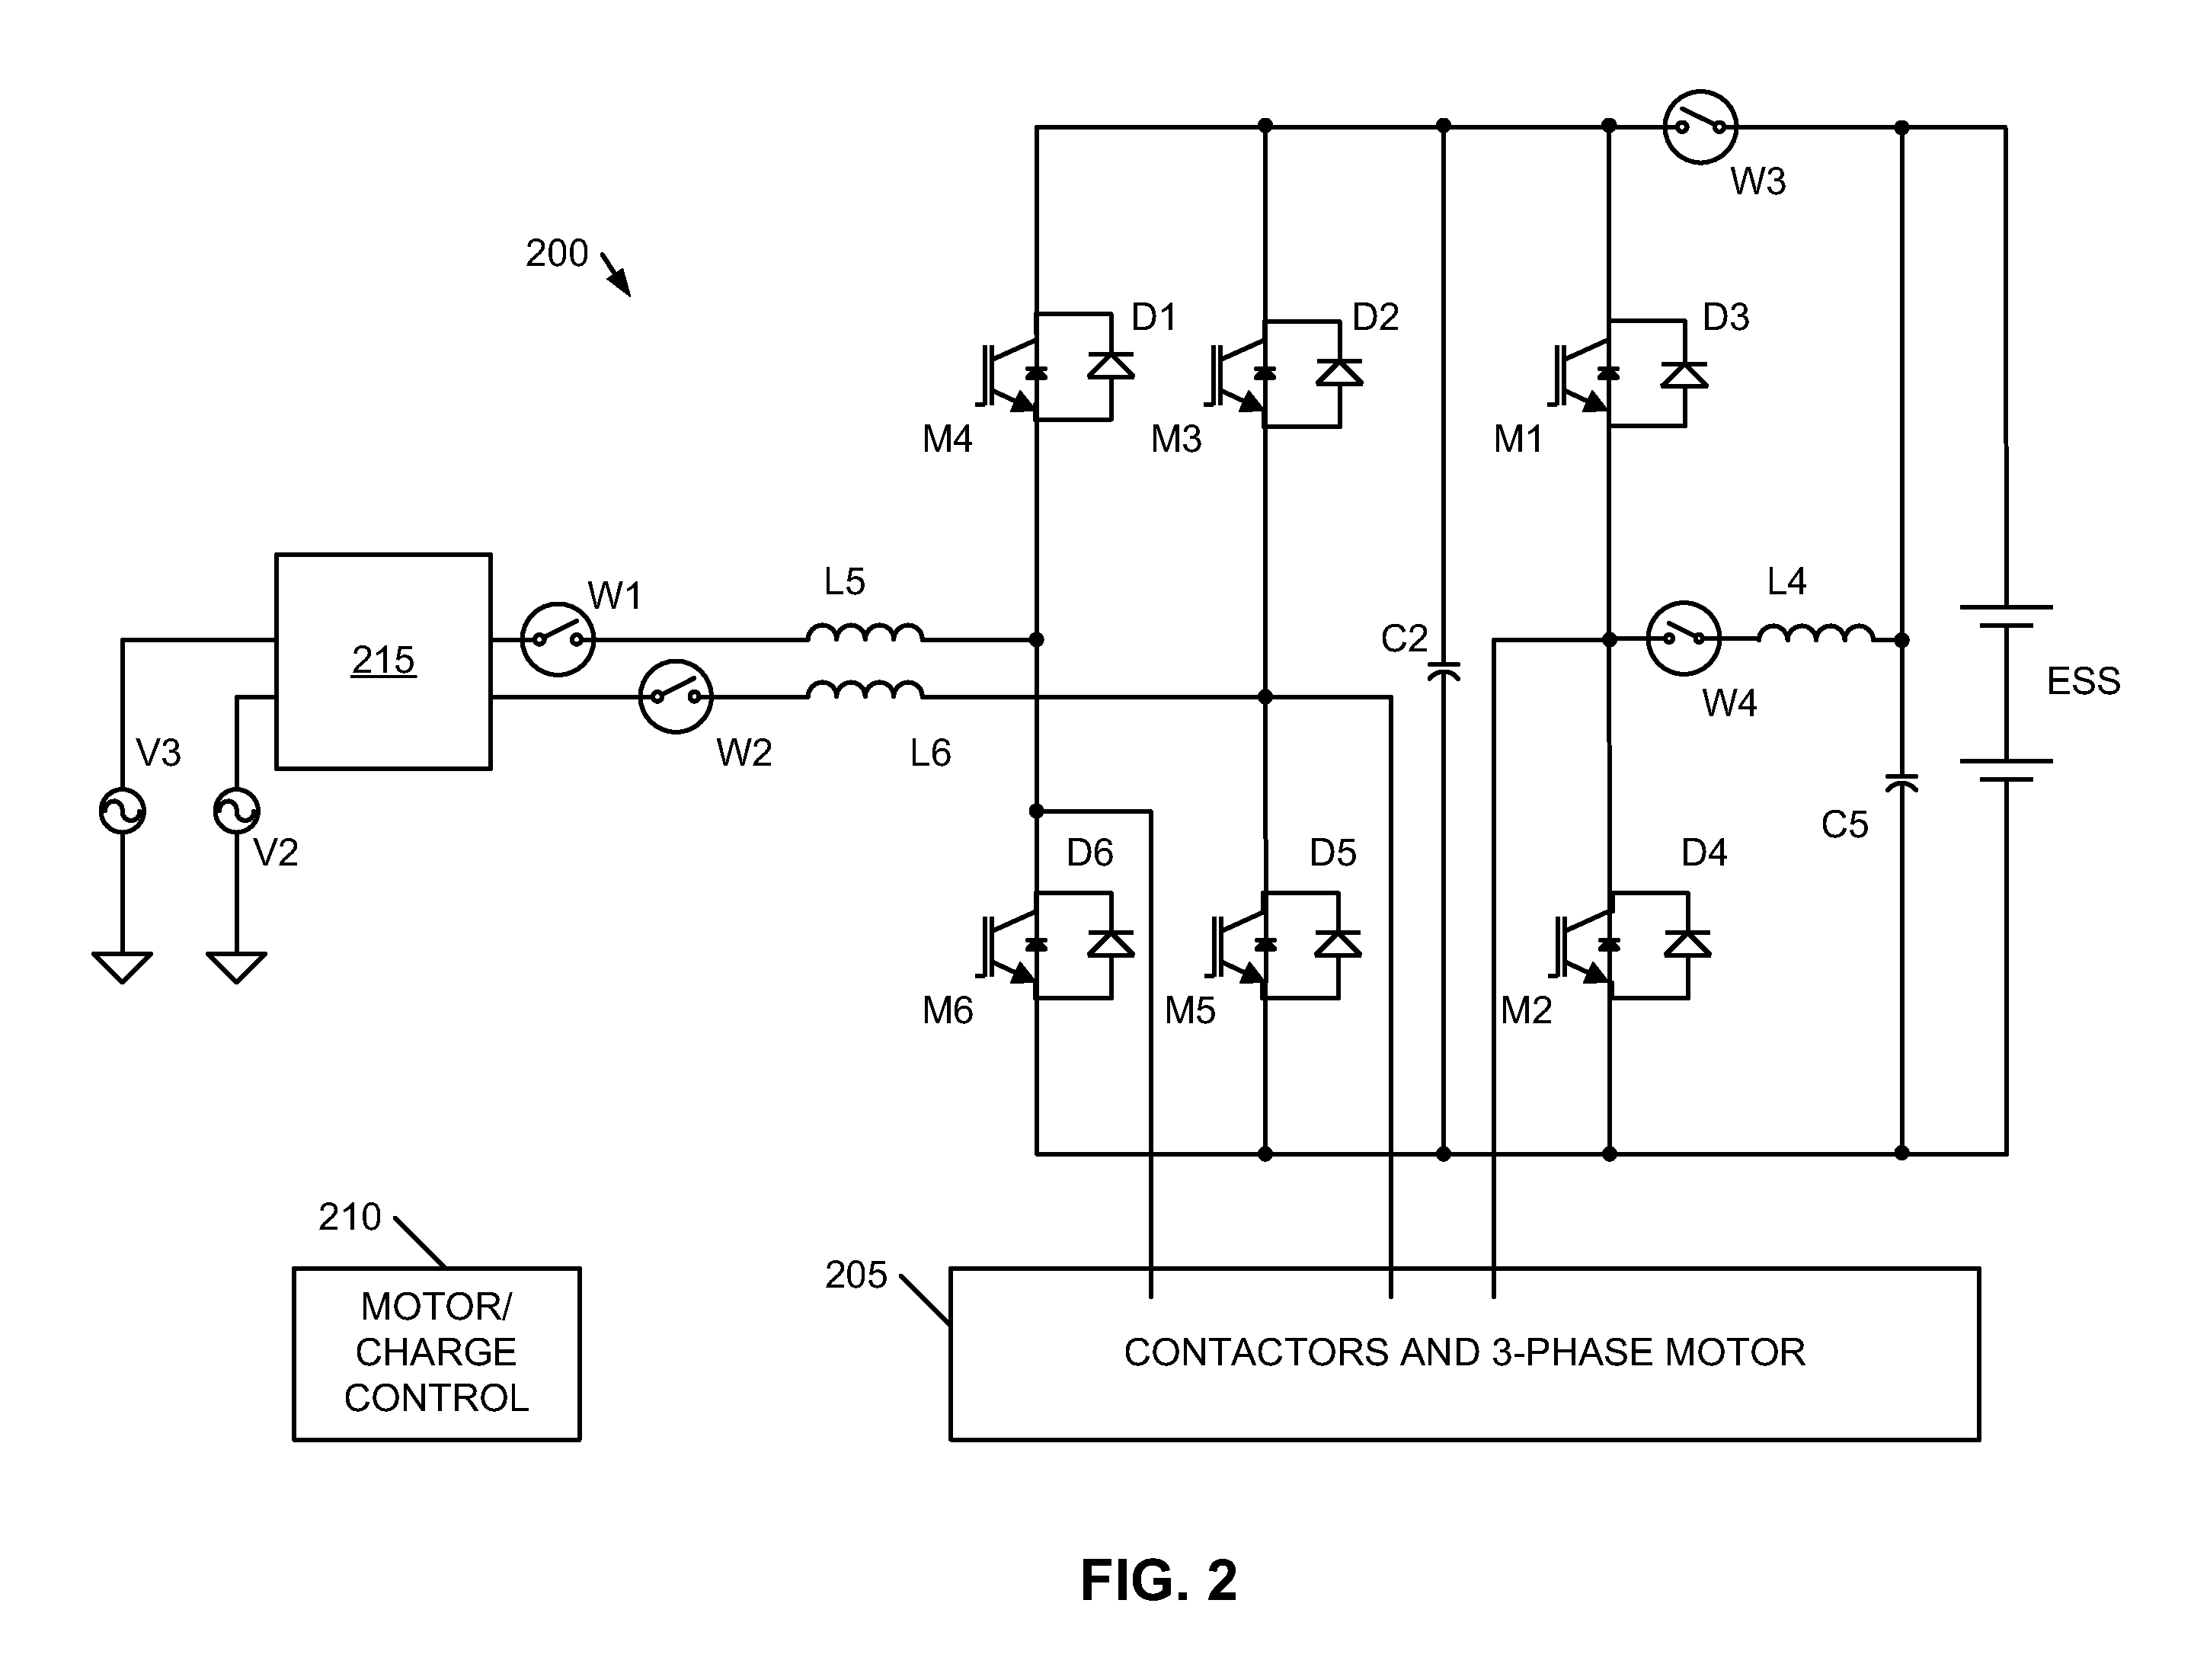 Bidirectional polyphase multimode converter including boost and buck-boost modes